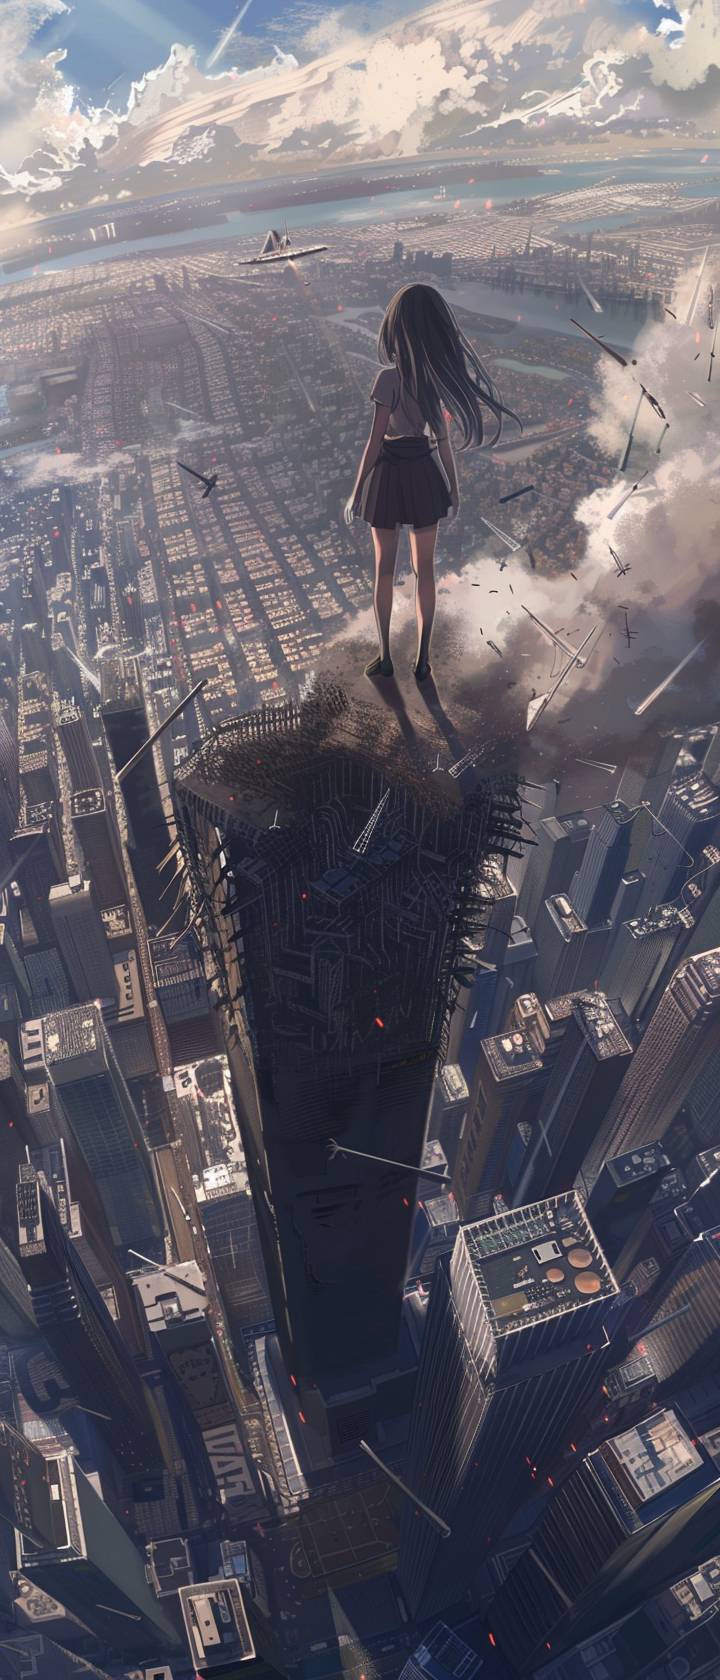 An anime girl standing on top of the World Trade Center North Tower as it crumbles to the ground after getting hit by a plane.